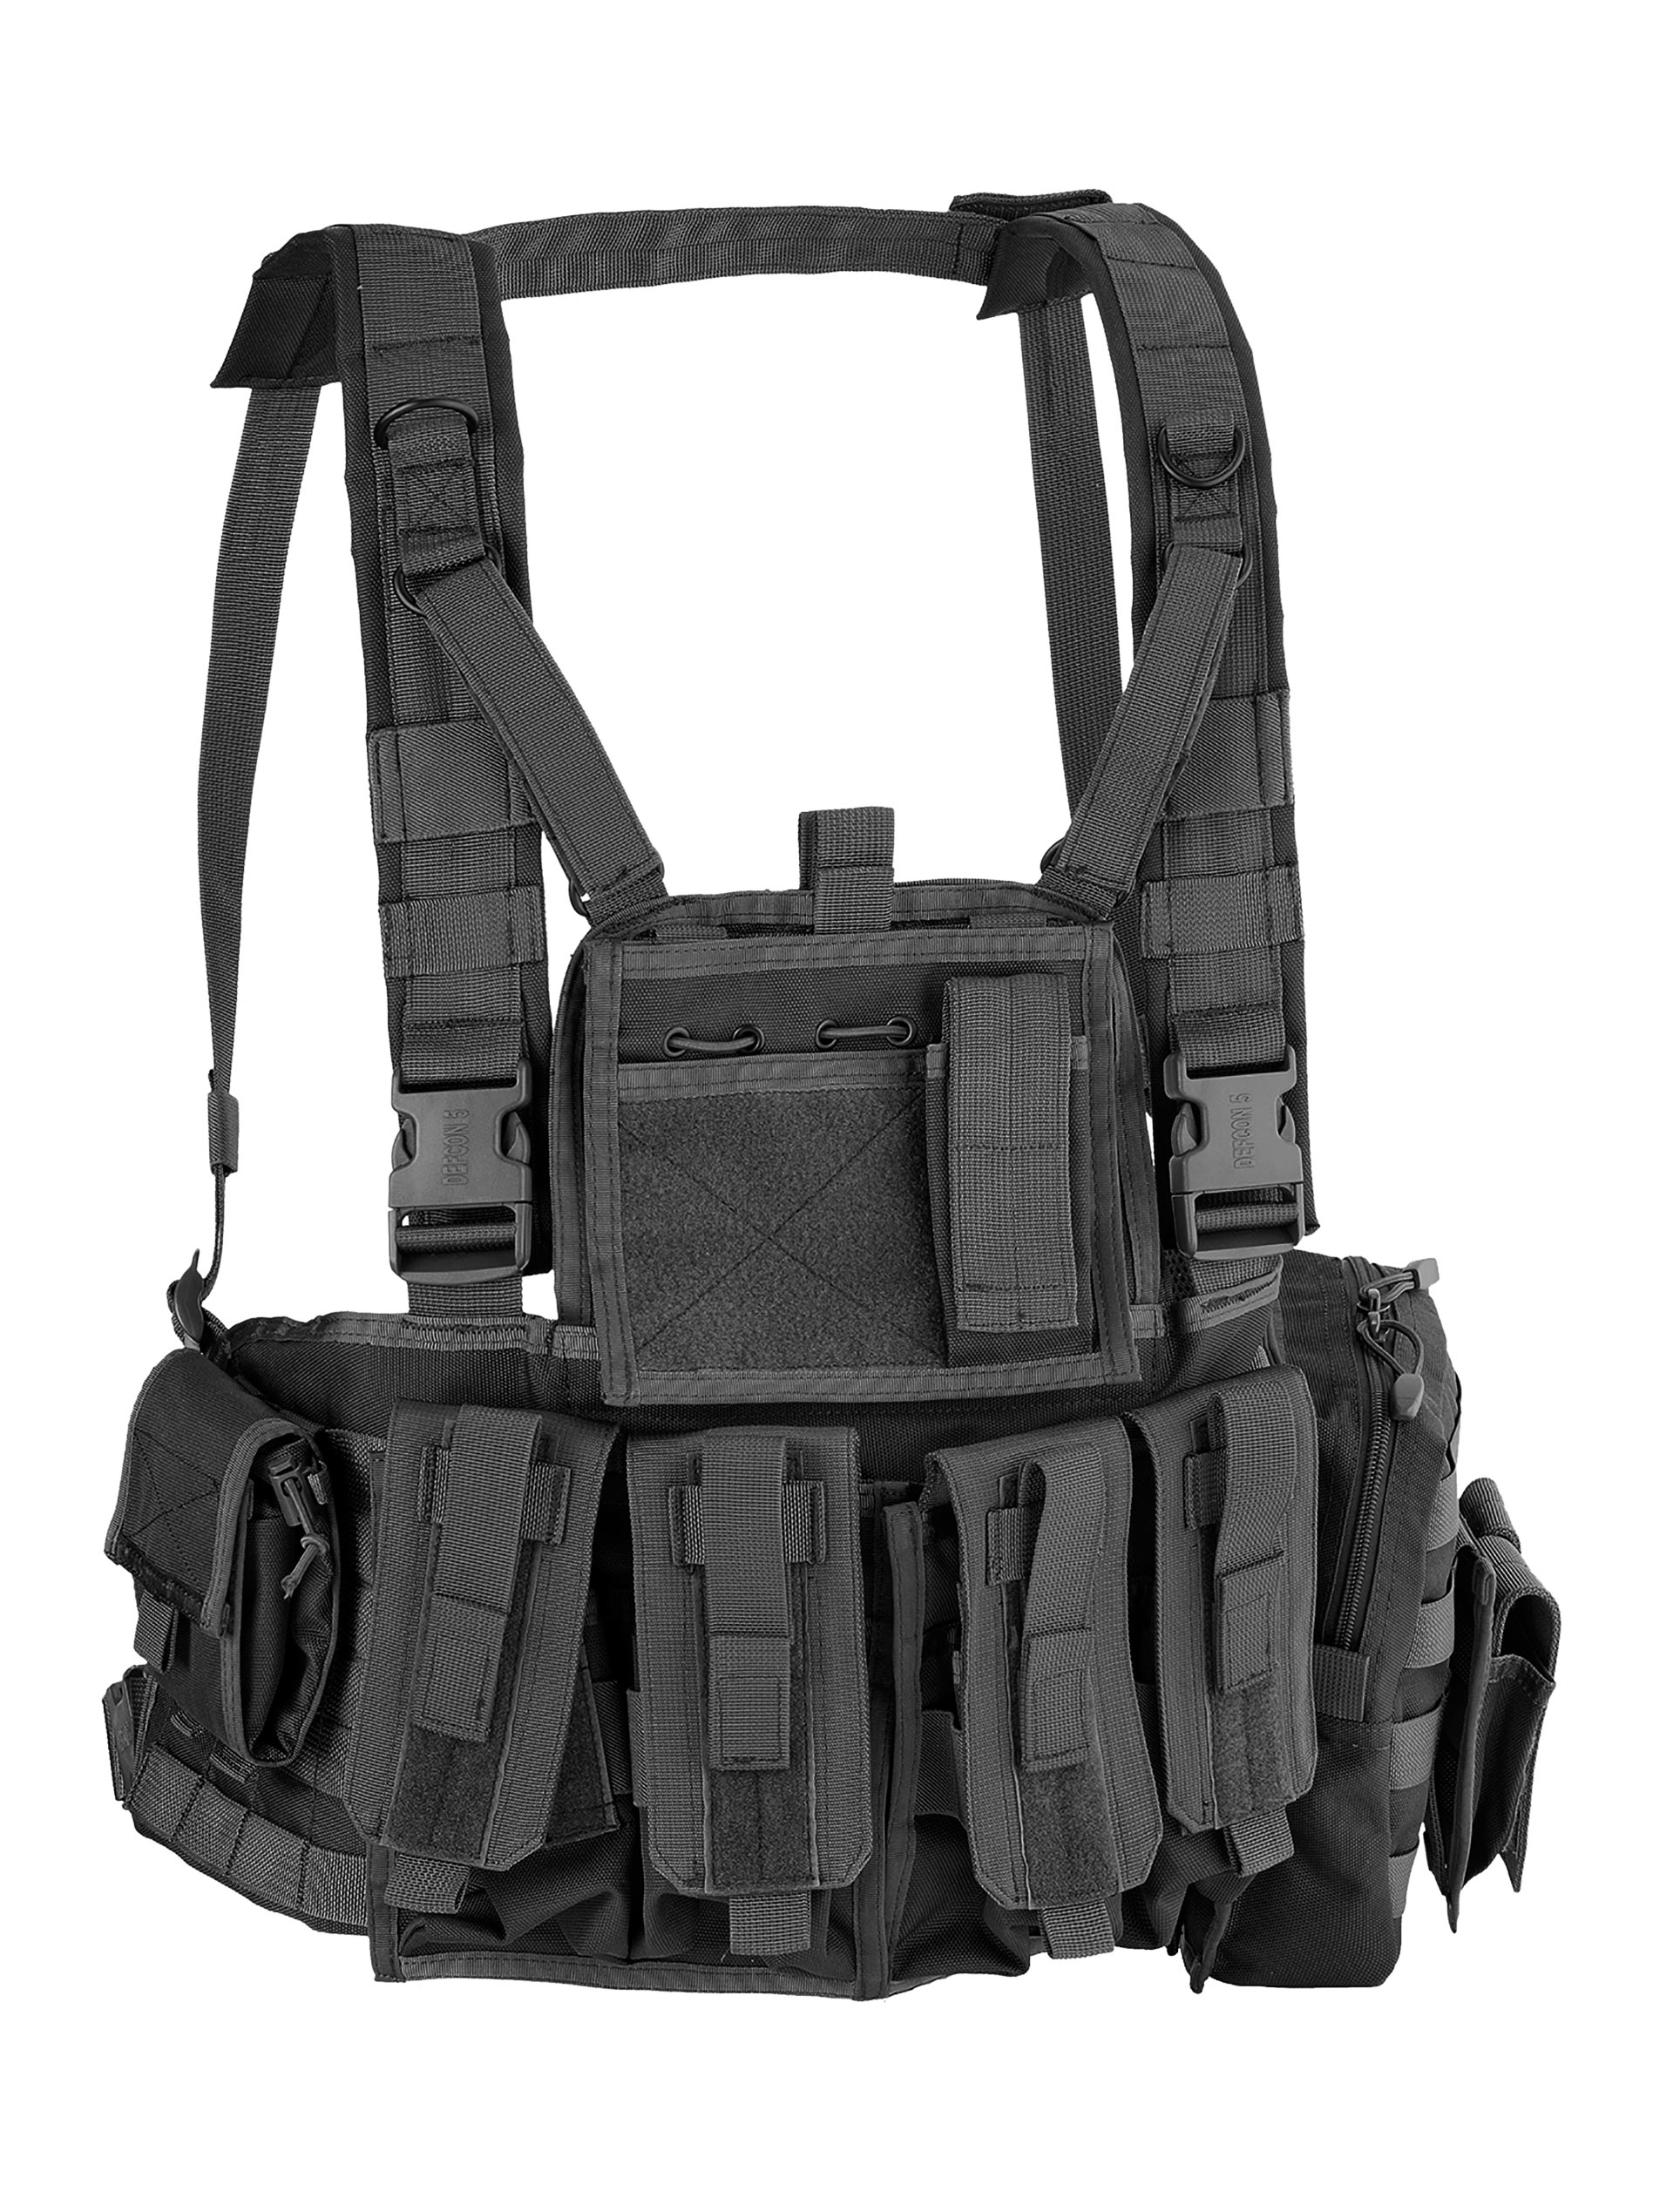 Details about   Tatcical Hunting Vest Chest Recon Bag Army Bag Chest Rig MOLLE Bag 